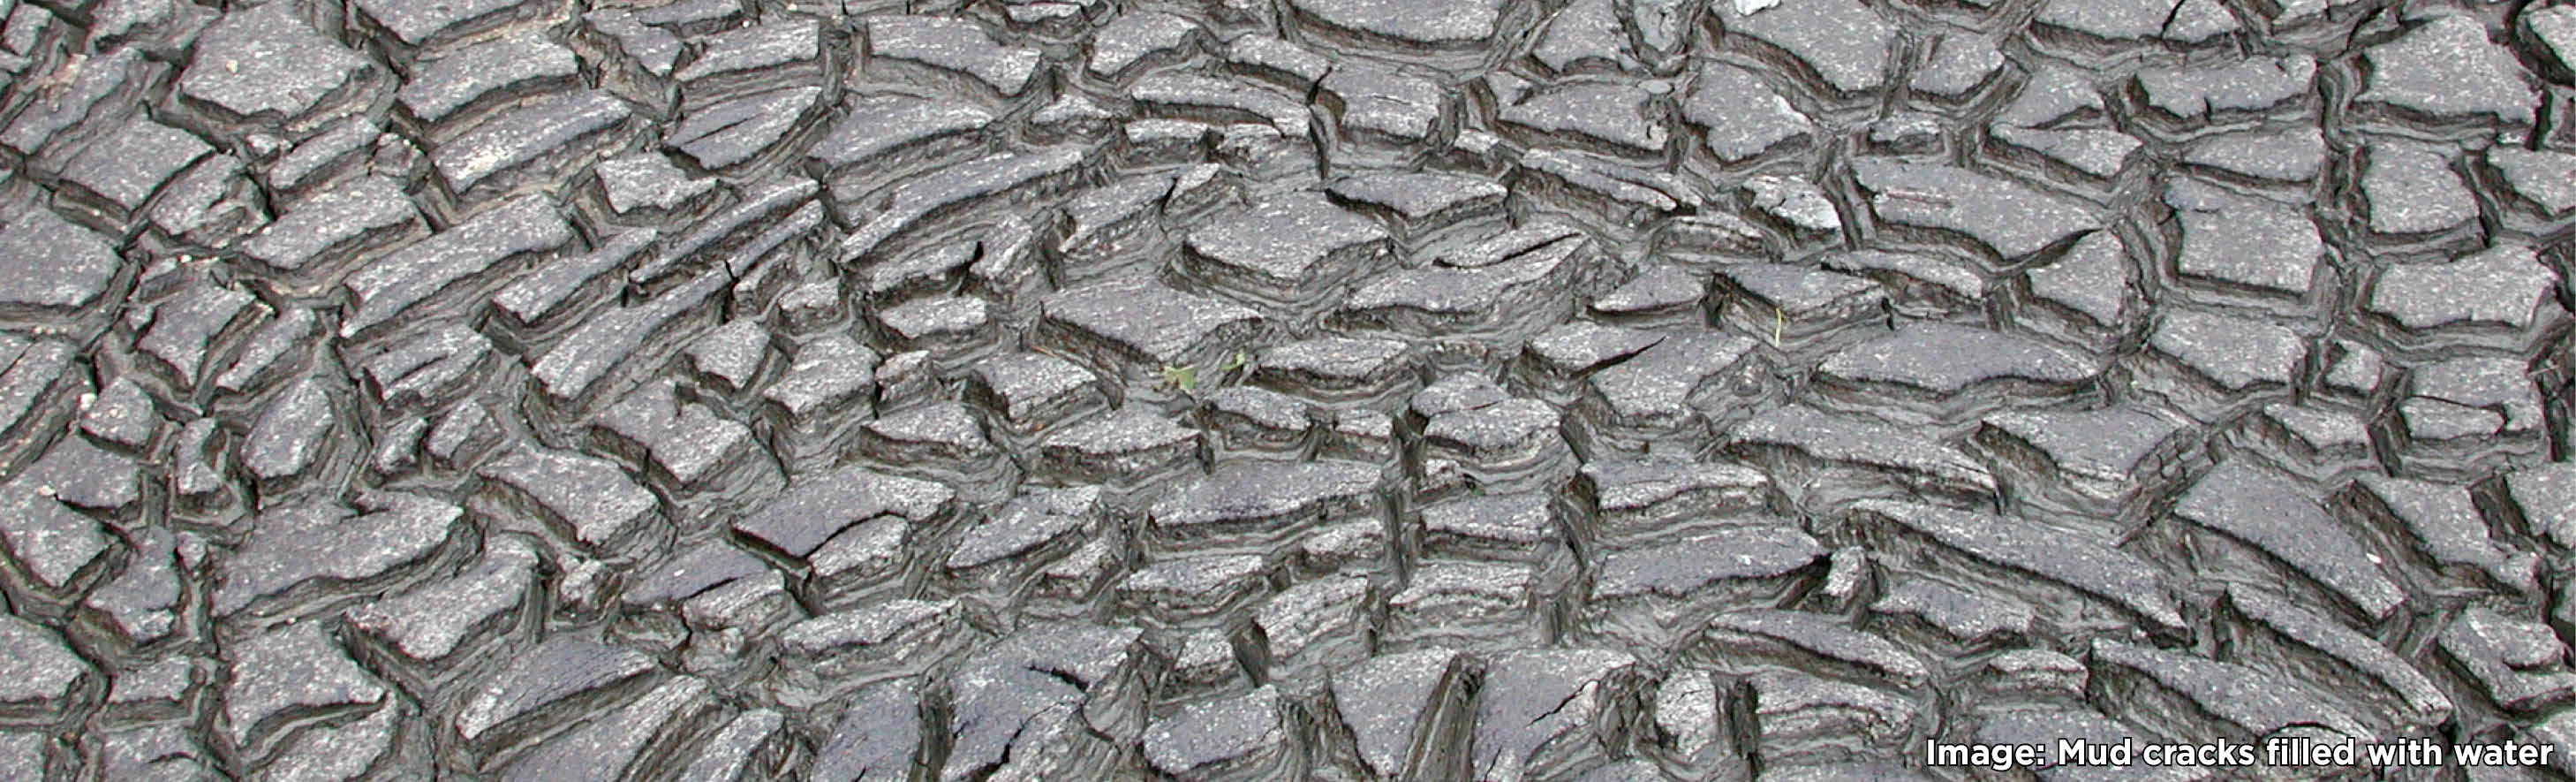 Mud cracks filled with water.